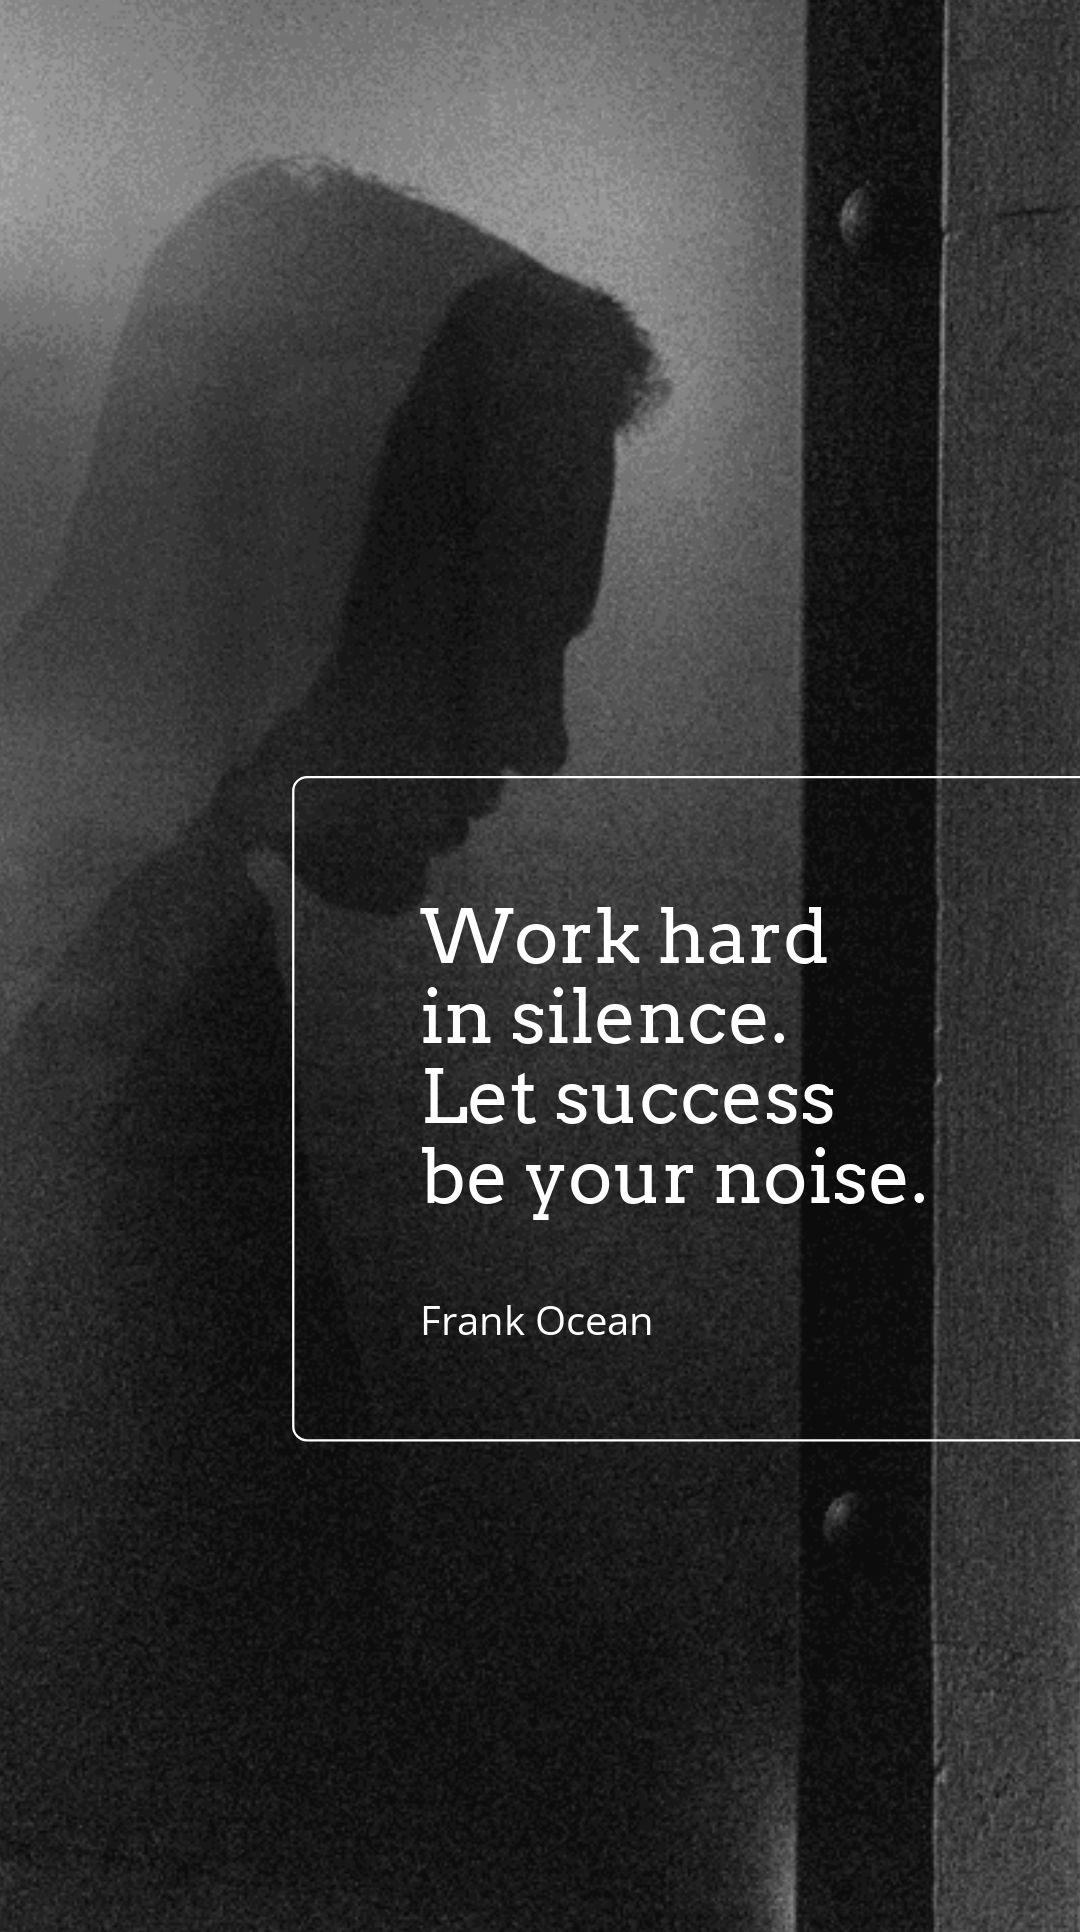 Frank Ocean - Work hard in silence. Let success be your noise.